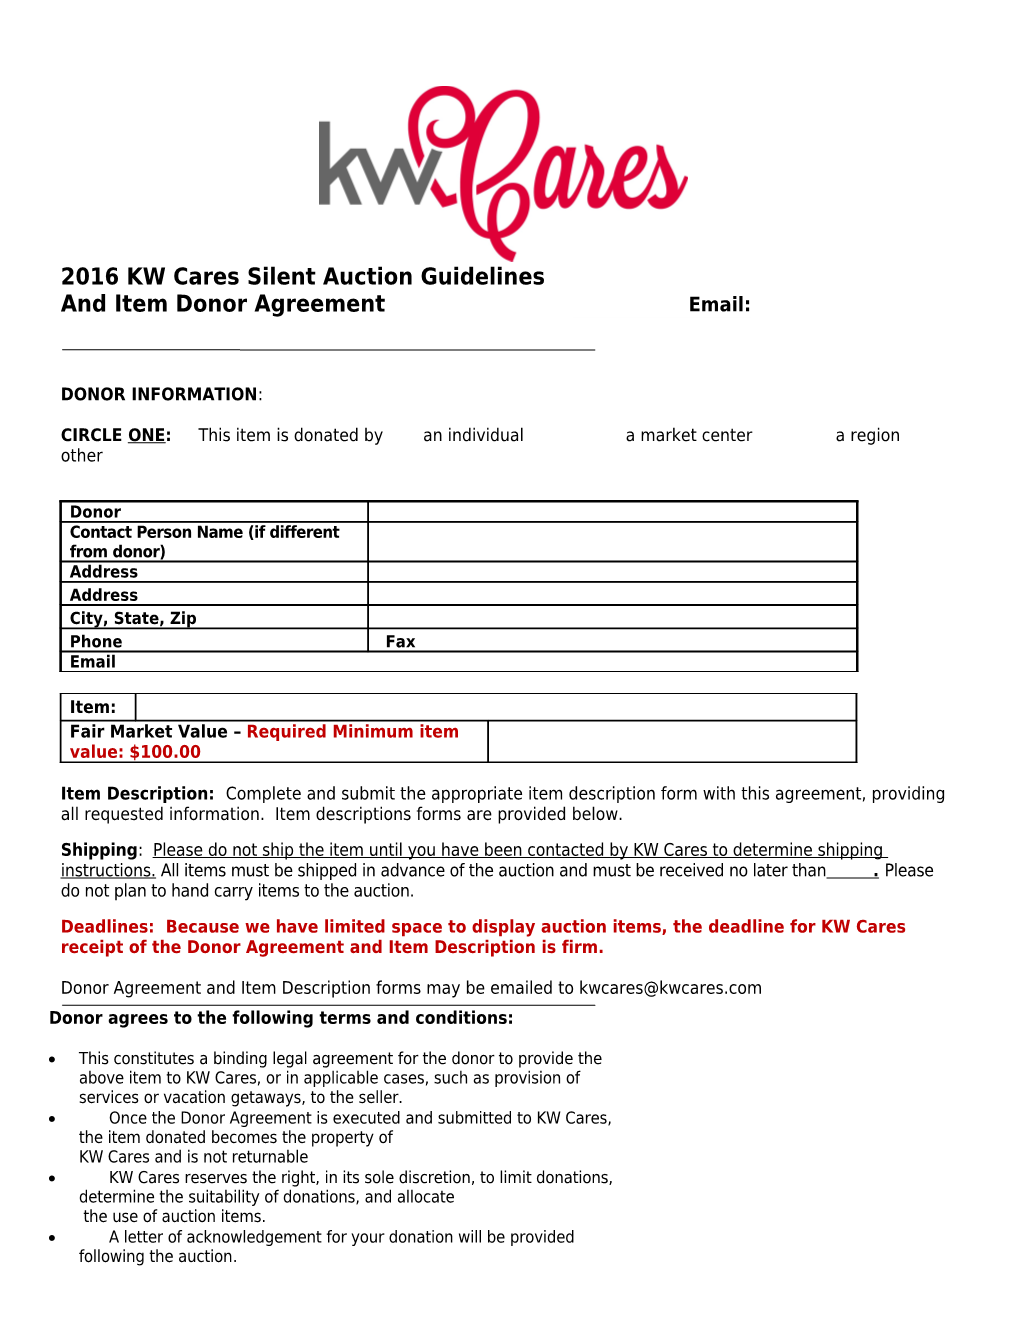 2016KW Cares Silent Auction Guidelines